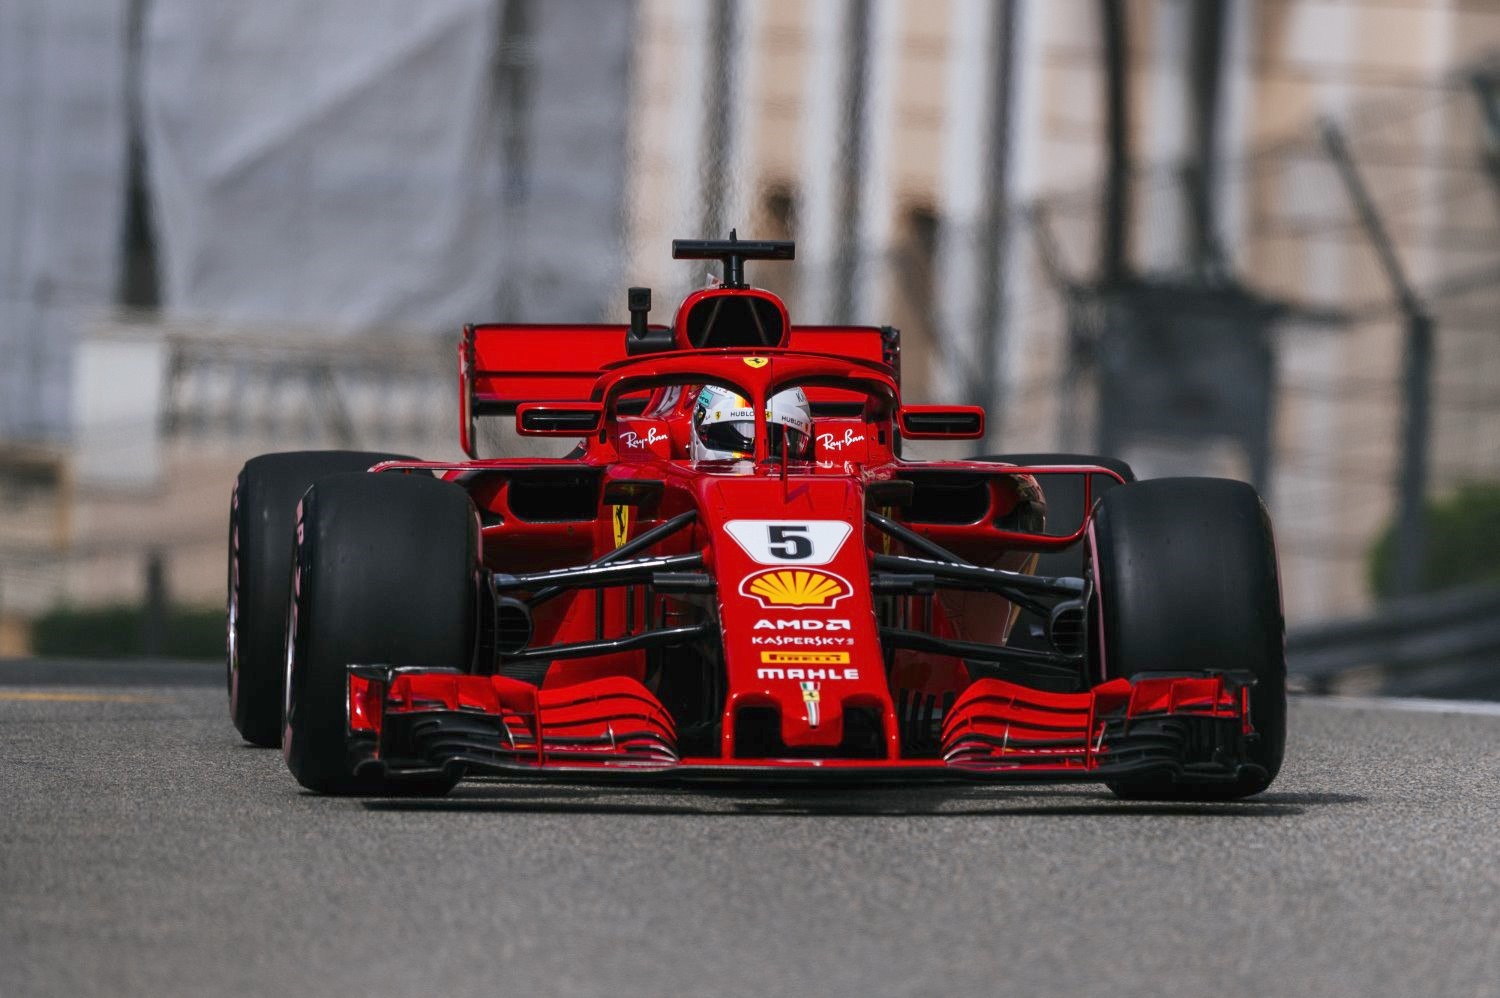 Even Ferrari could leave F1 over rising costs and dropping revenue